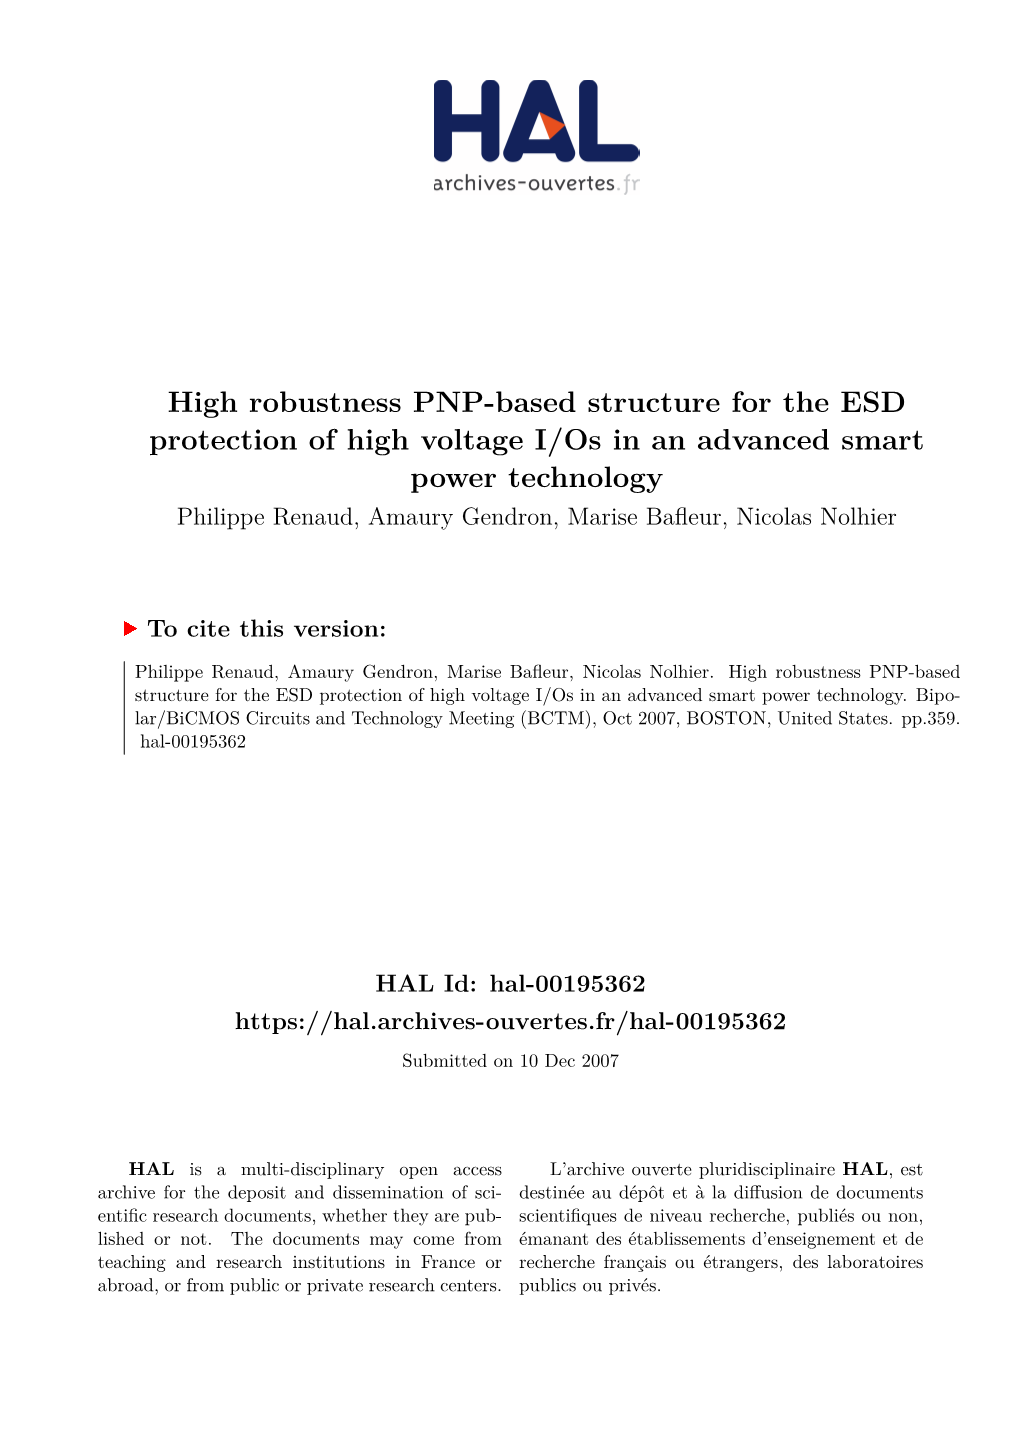 High Robustness PNP-Based Structure for the ESD Protection of High